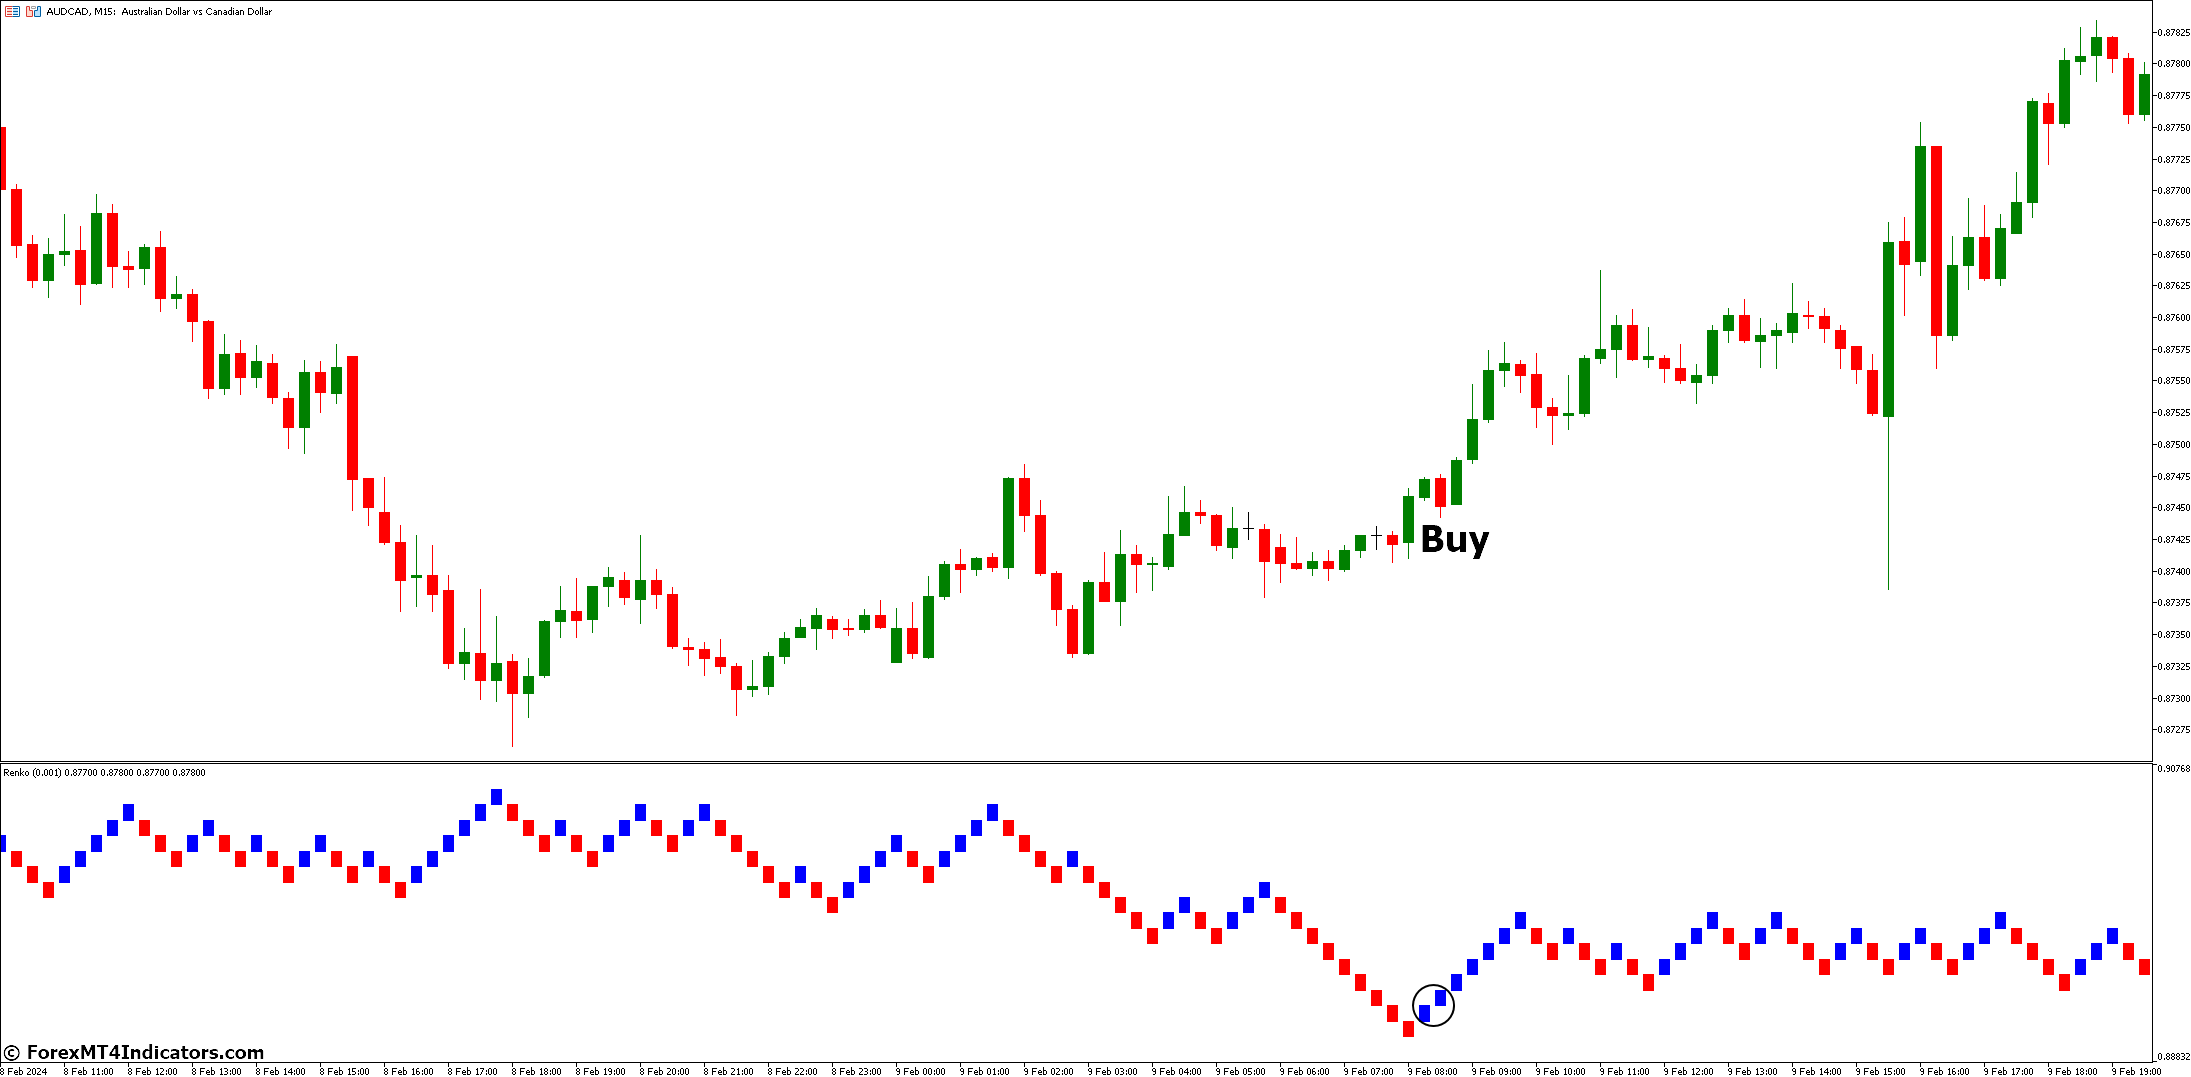 How to Trade with Renko Indicator - Buy Entry